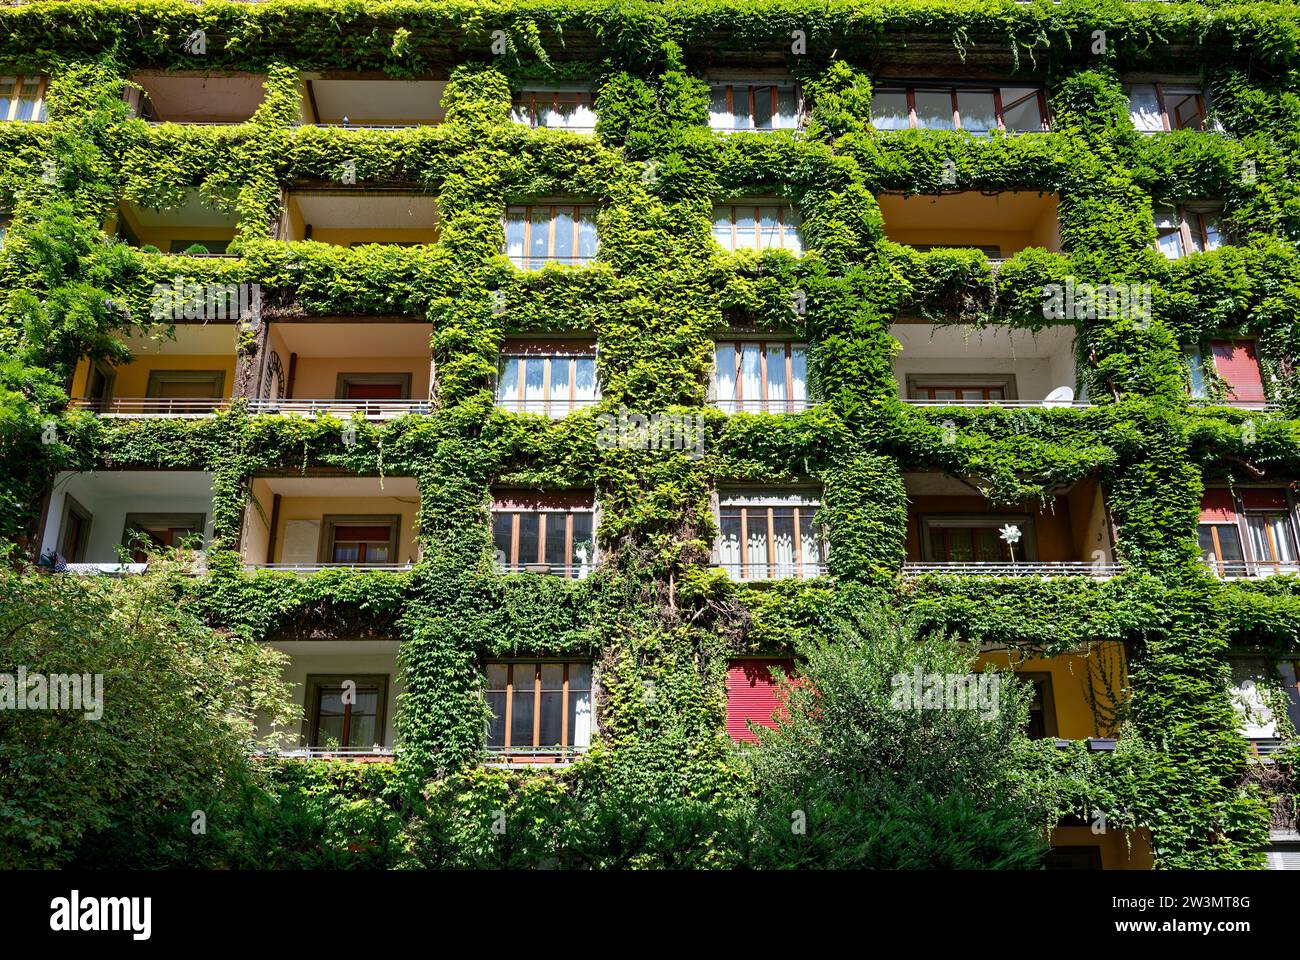 Facade of a large residential building adorned with lush foliage, bathed in warm afternoon light. Stock Photo